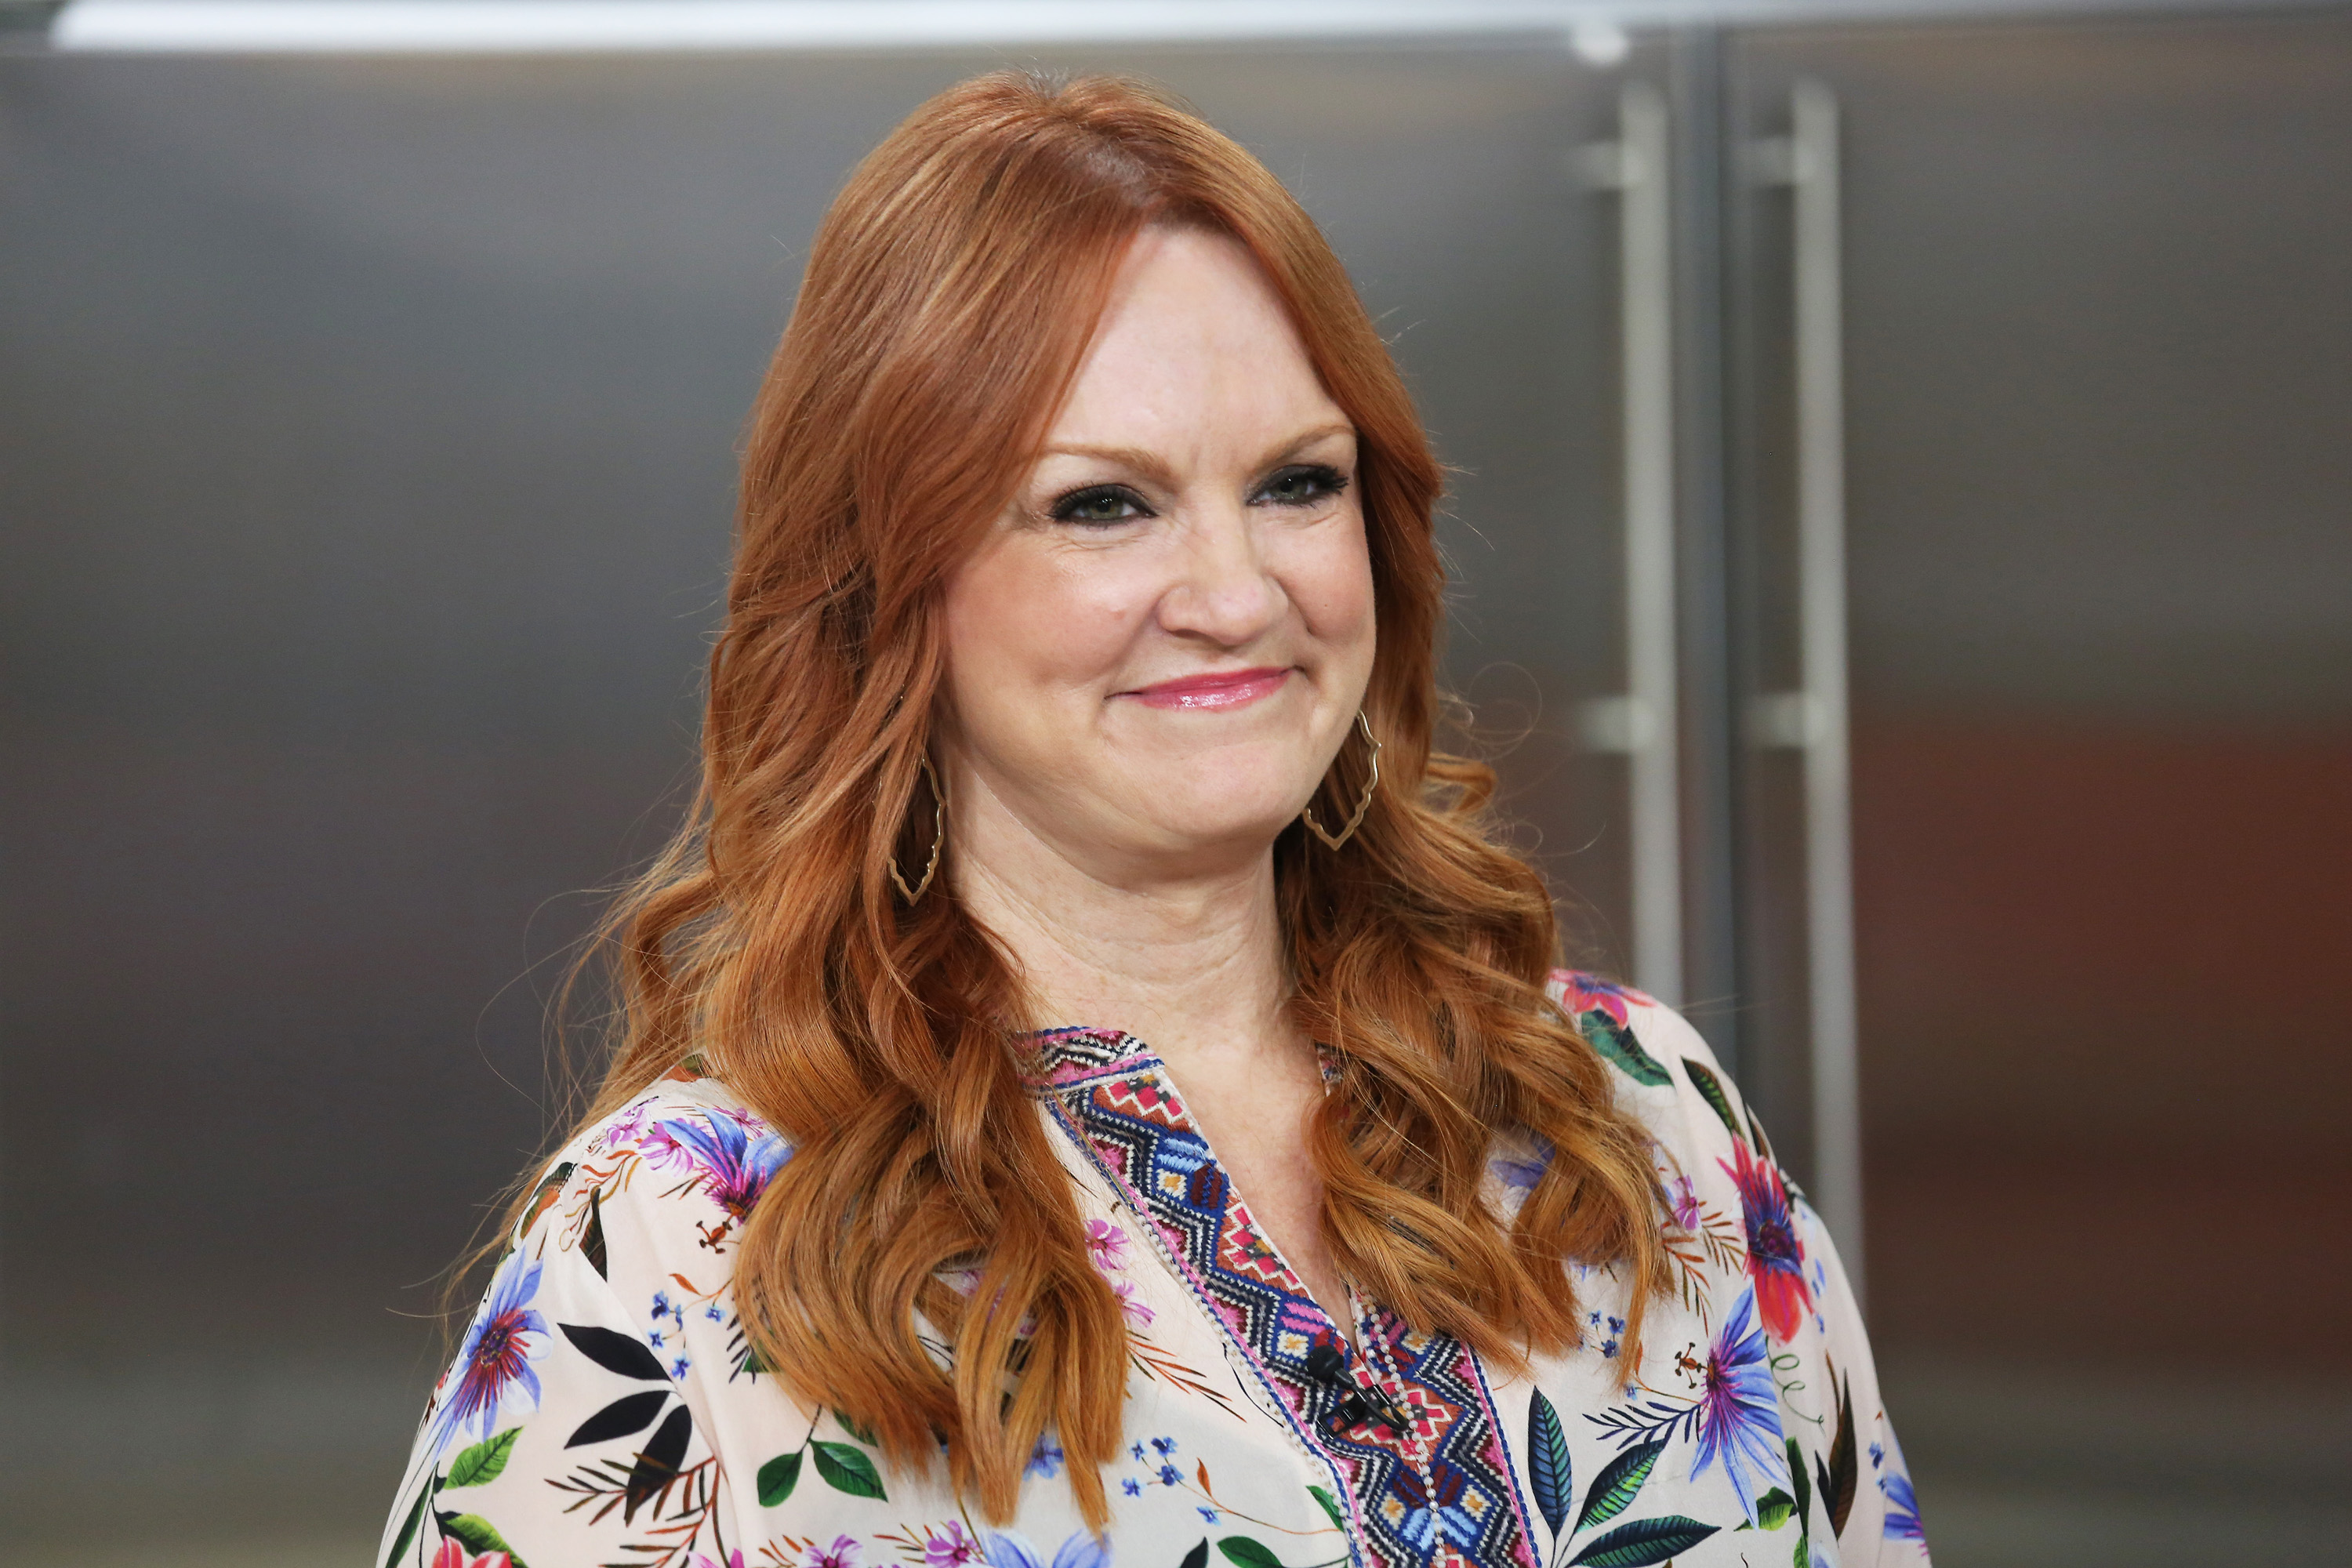 Ree Drummond smiles and wears a floral shirt.